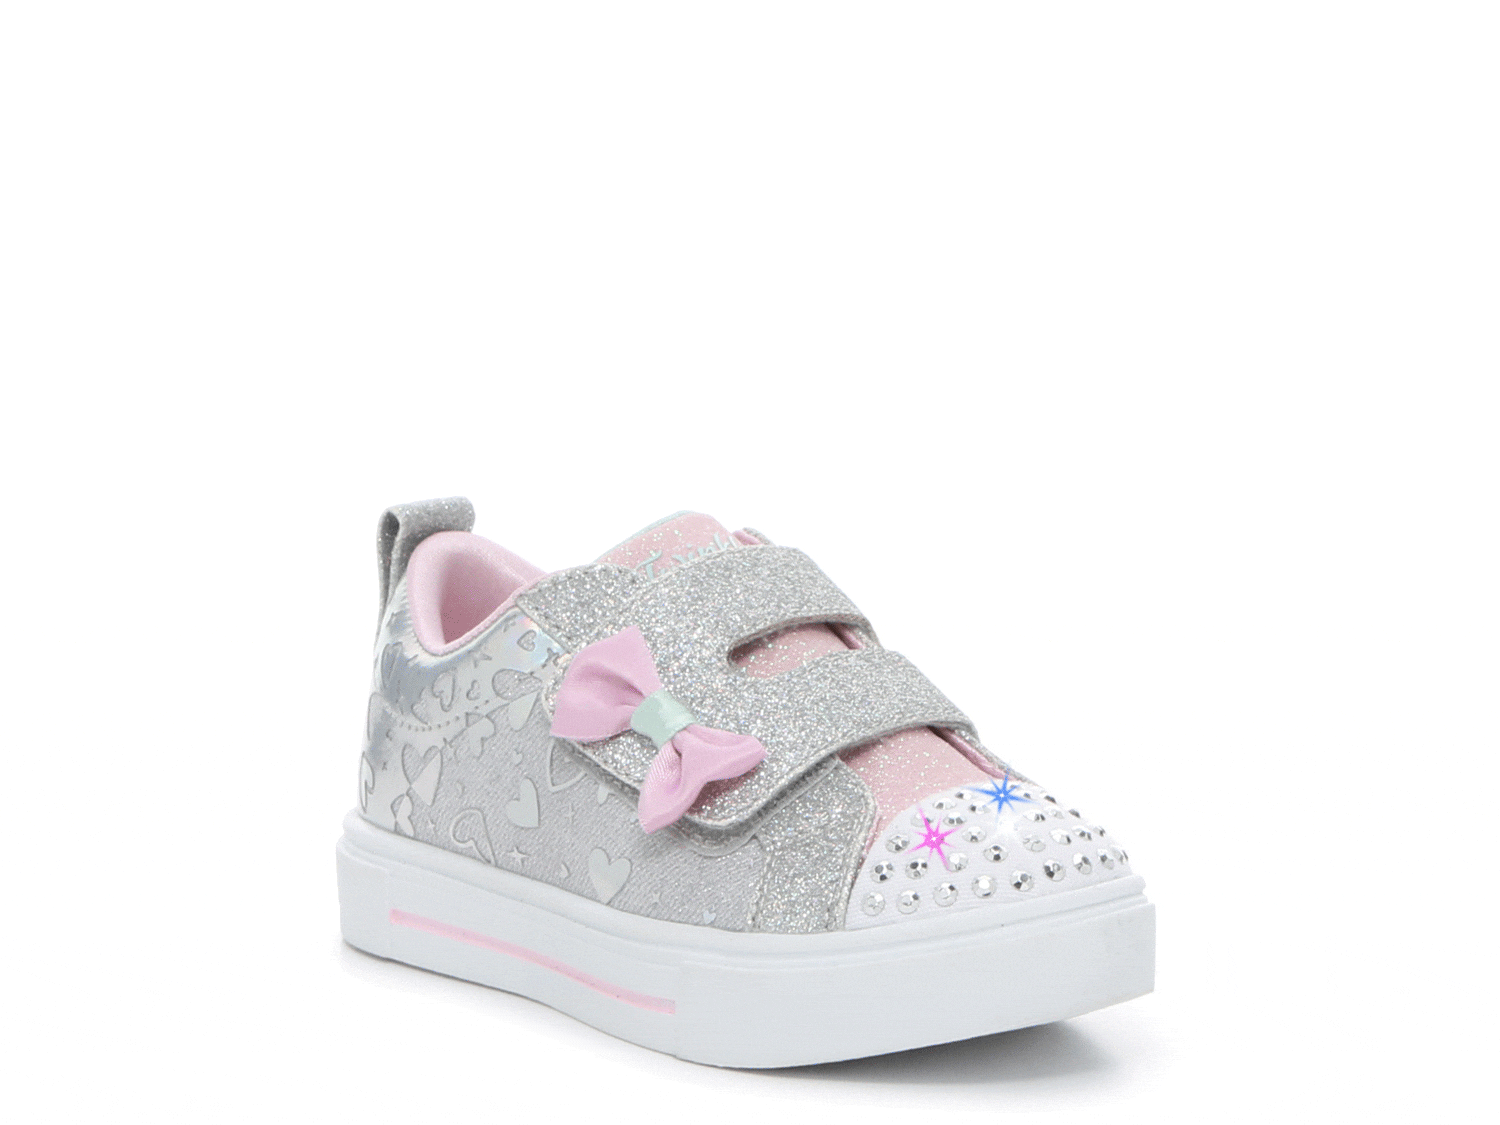 Skechers Twinkle Toes Light Up Size | peacecommission.kdsg.gov.ng